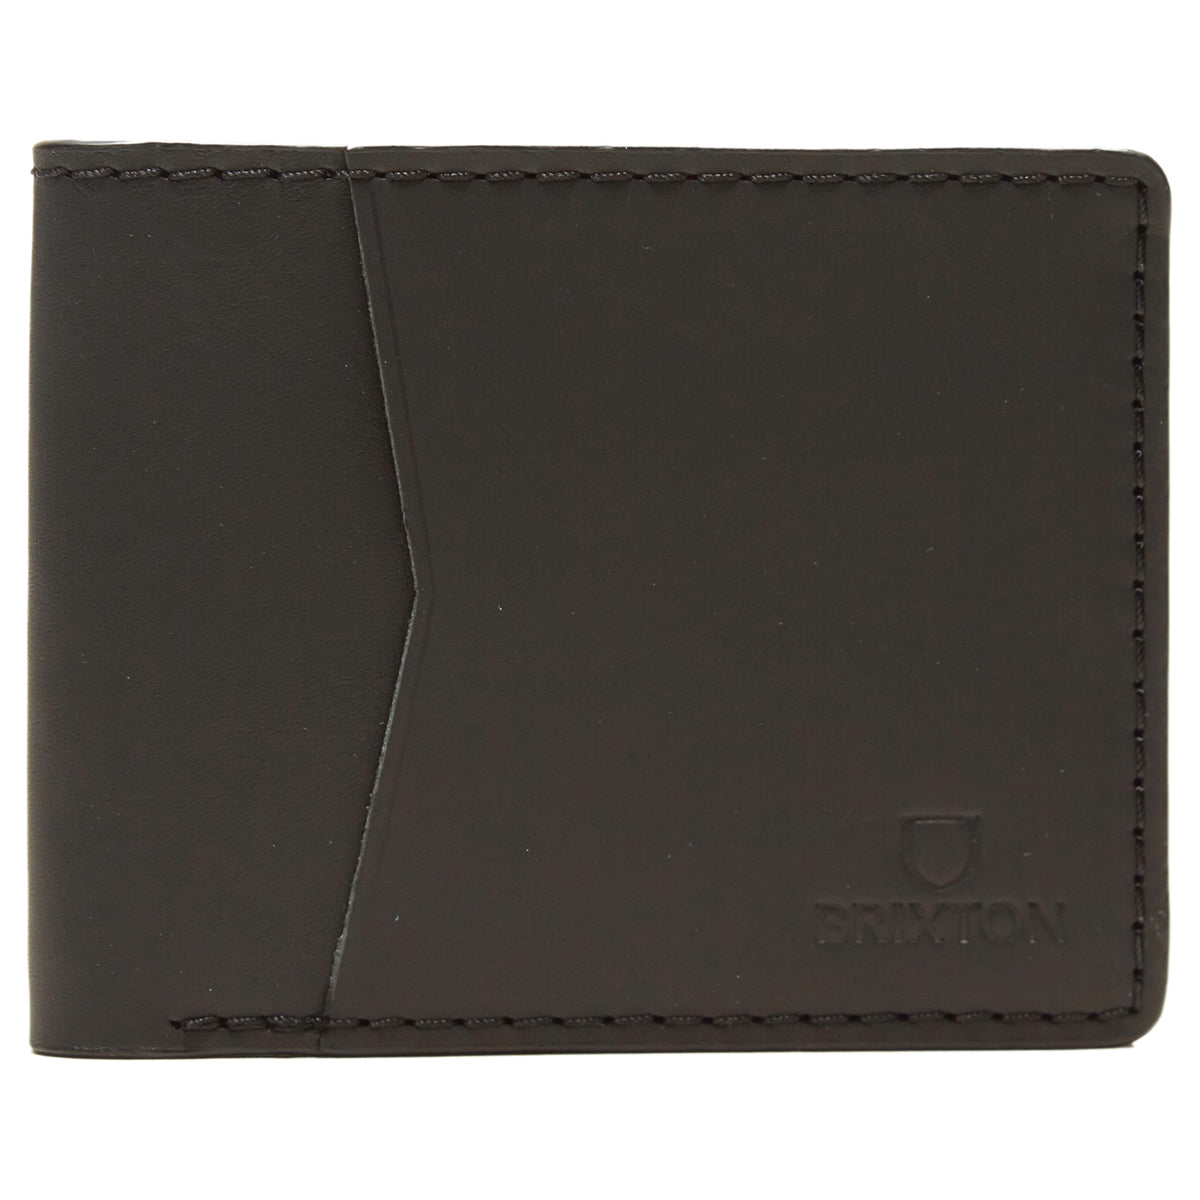 Brixton Traditional Leather Wallet - Black image 1